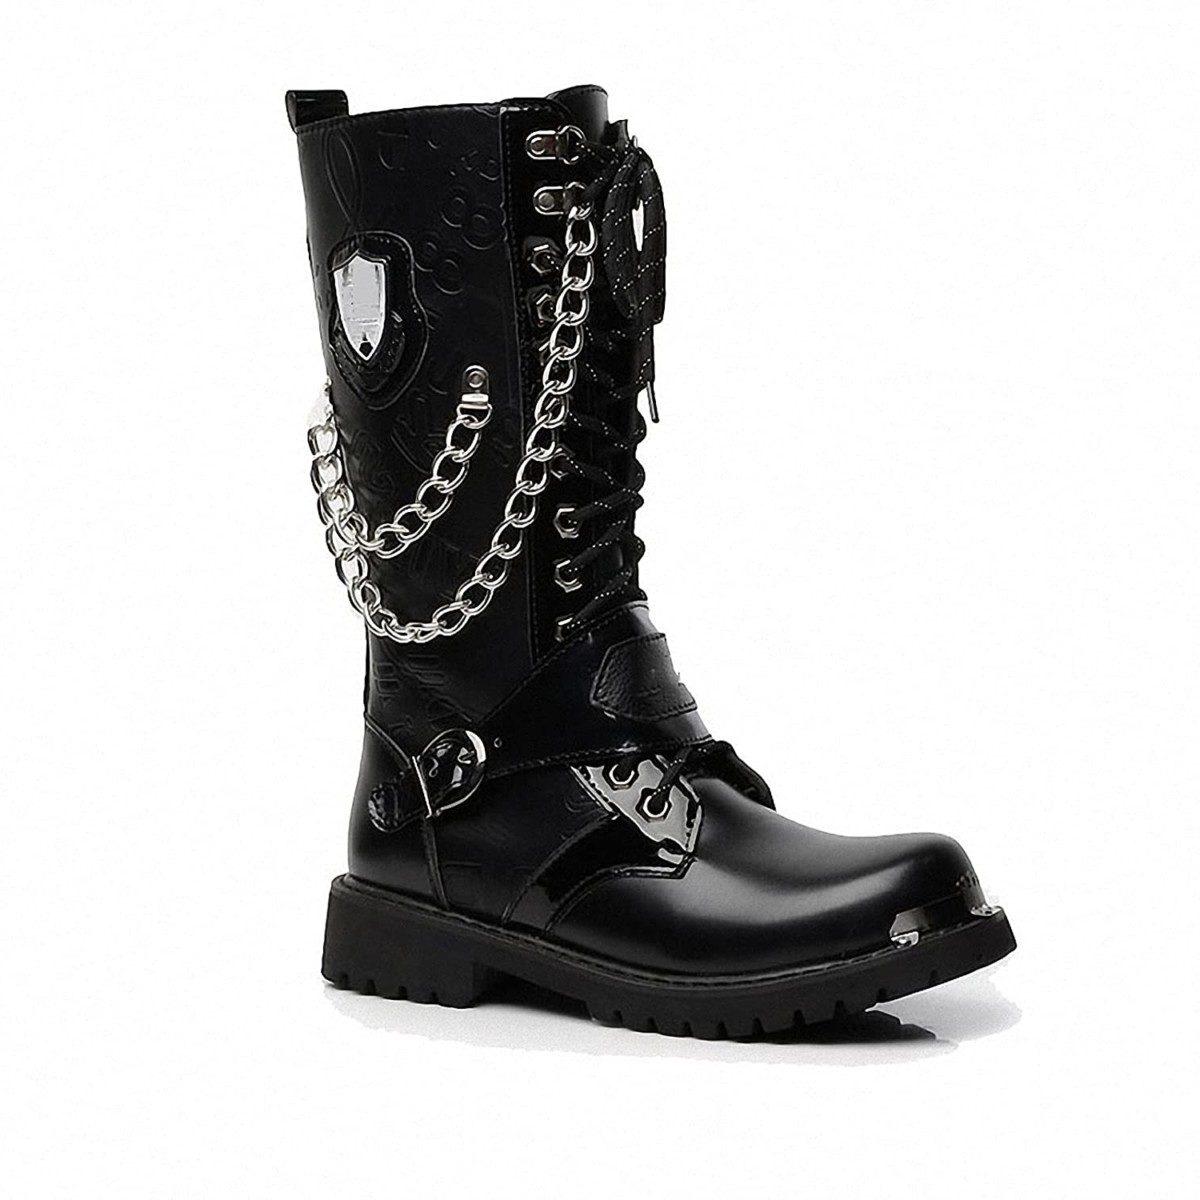 The 11 Best Men's Goth Boots - The Gothic Merchant